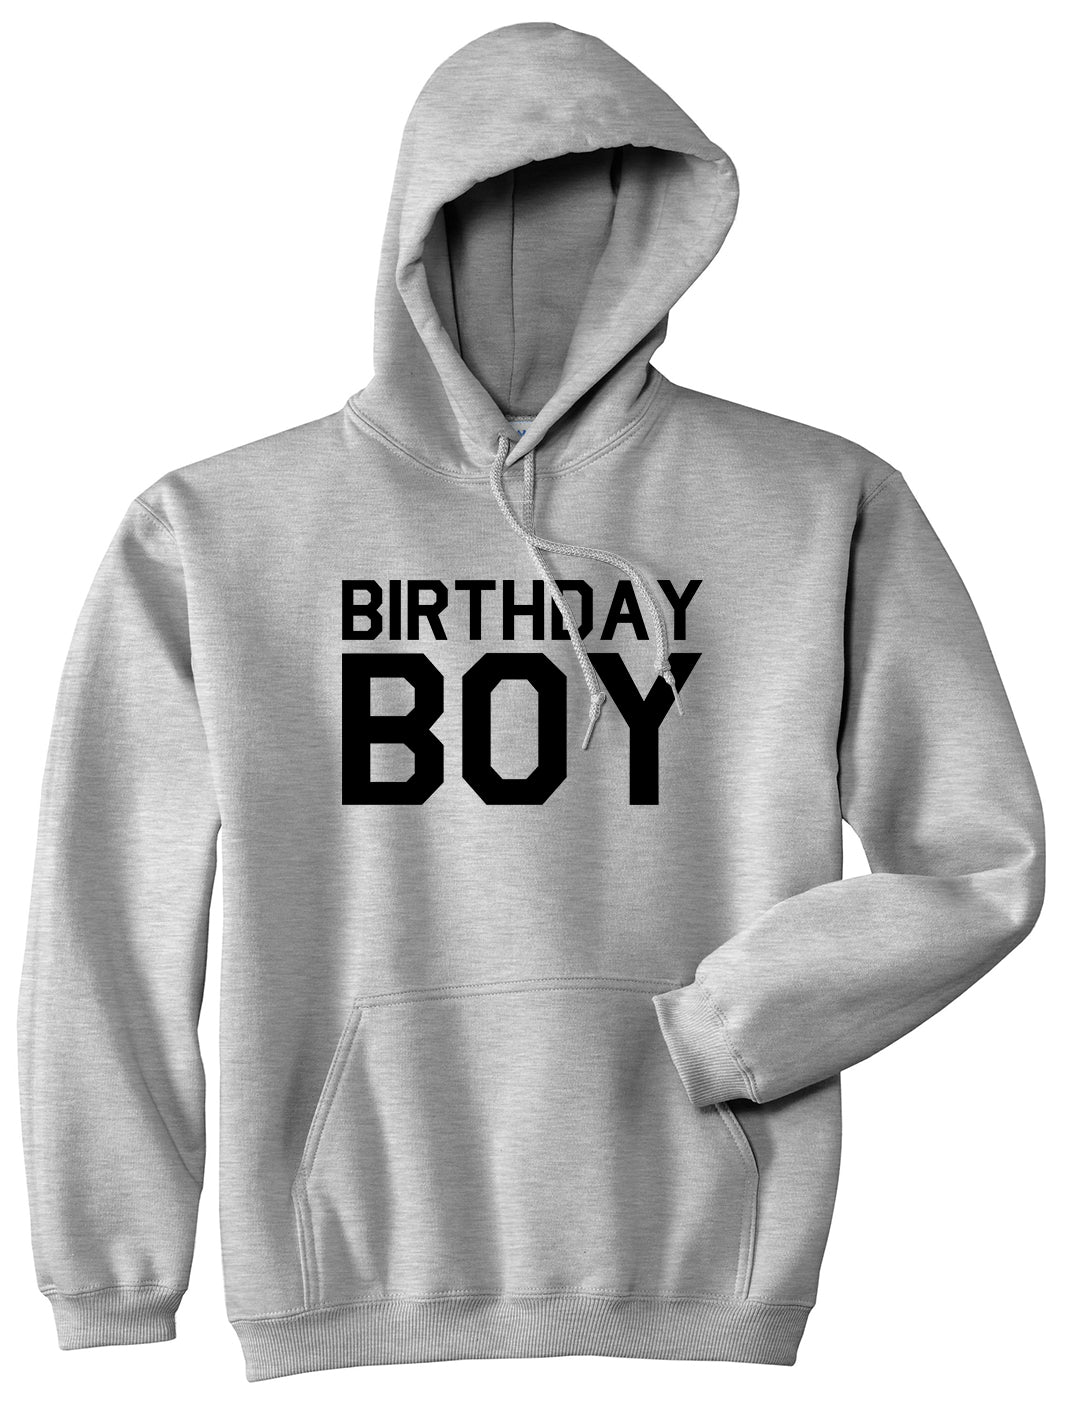 Birthday Boy Grey Pullover Hoodie by Kings Of NY